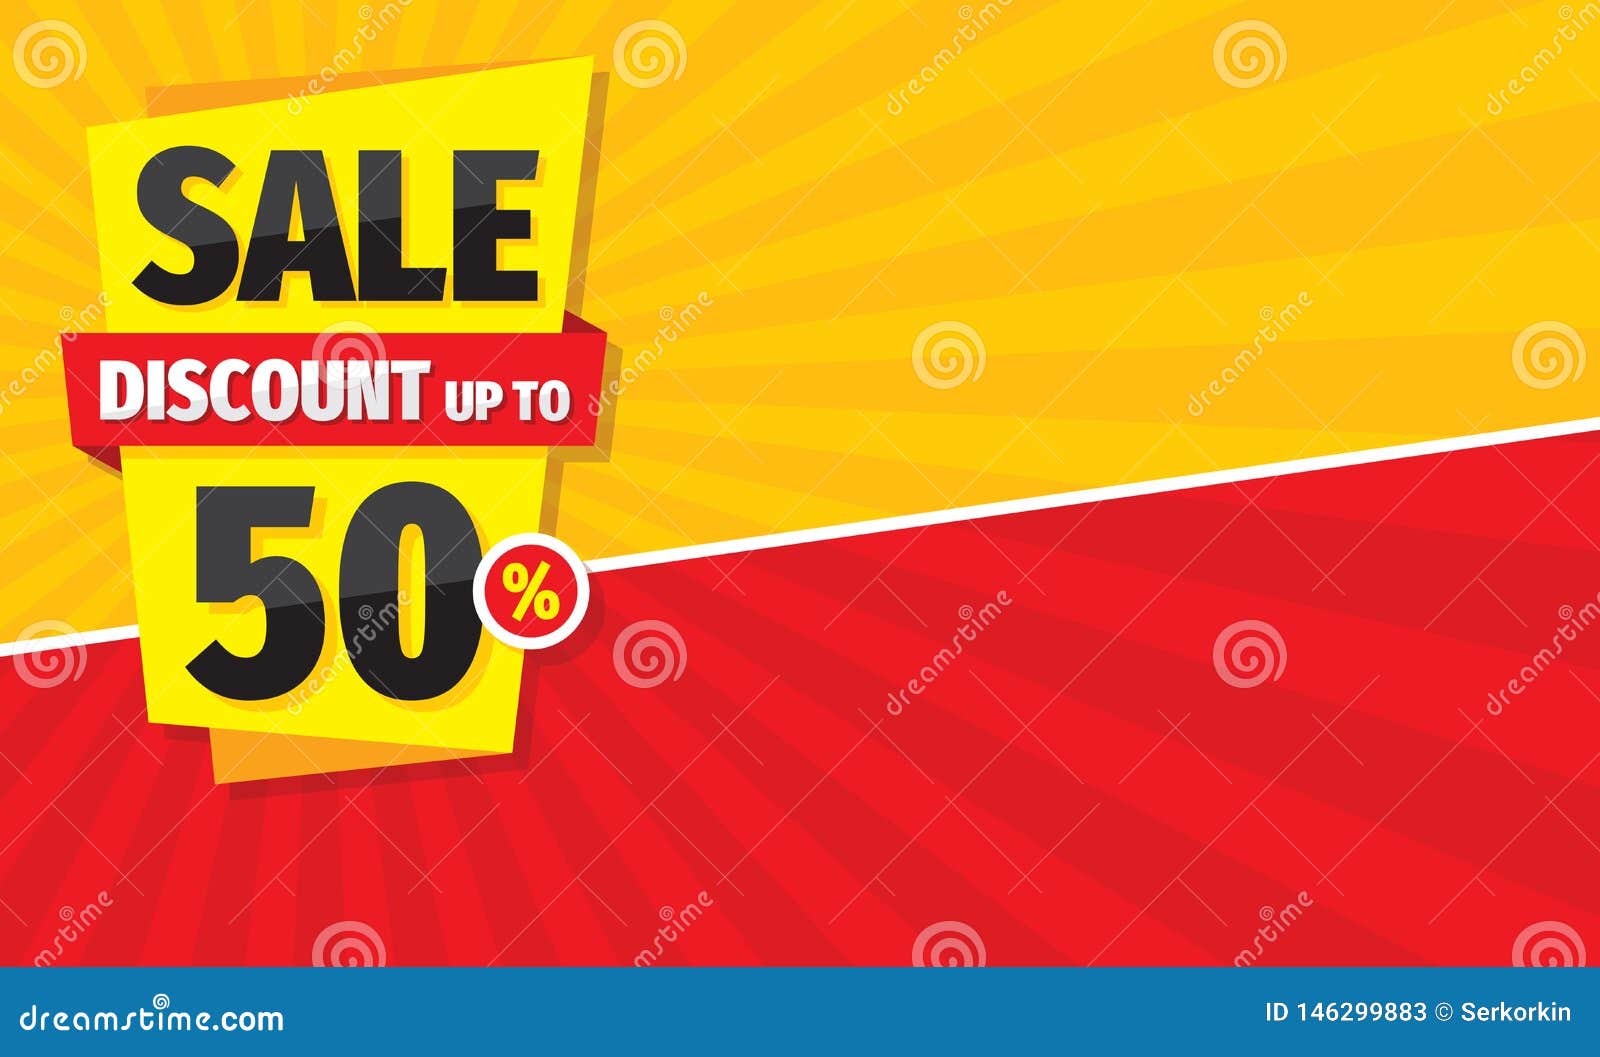 sale concept horizontal banner. discount up to 50% off promotion poster.